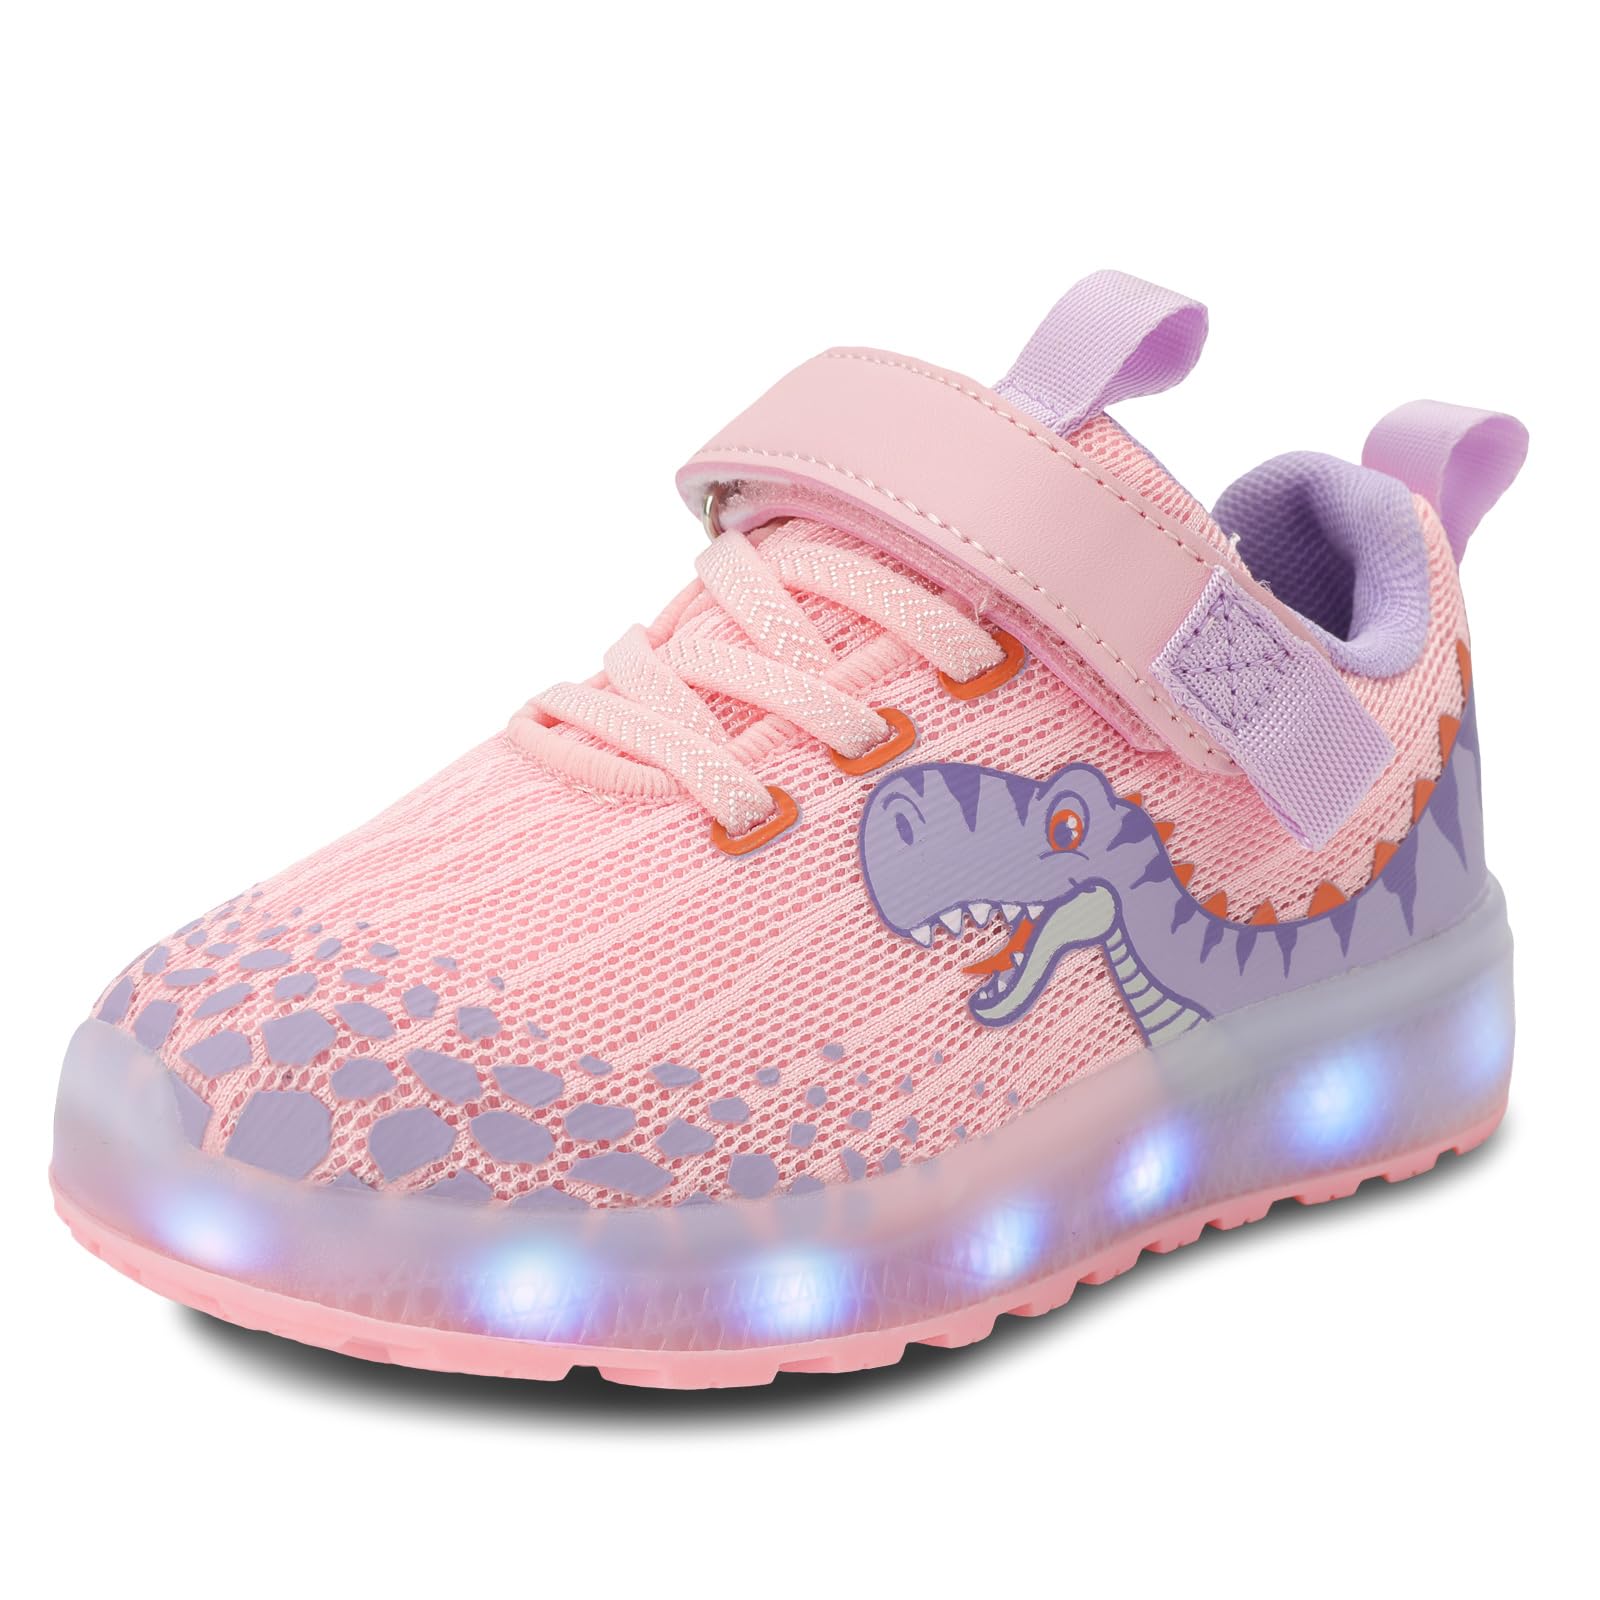 SKASO Toddler Sneakers Light Up Shoes for Boy Girl with Hook and Loop Rechargeable 7 Colors Adjustable Led Shoes Comfortable Non-Slip Dinosaur Shark Shoes Little Kid